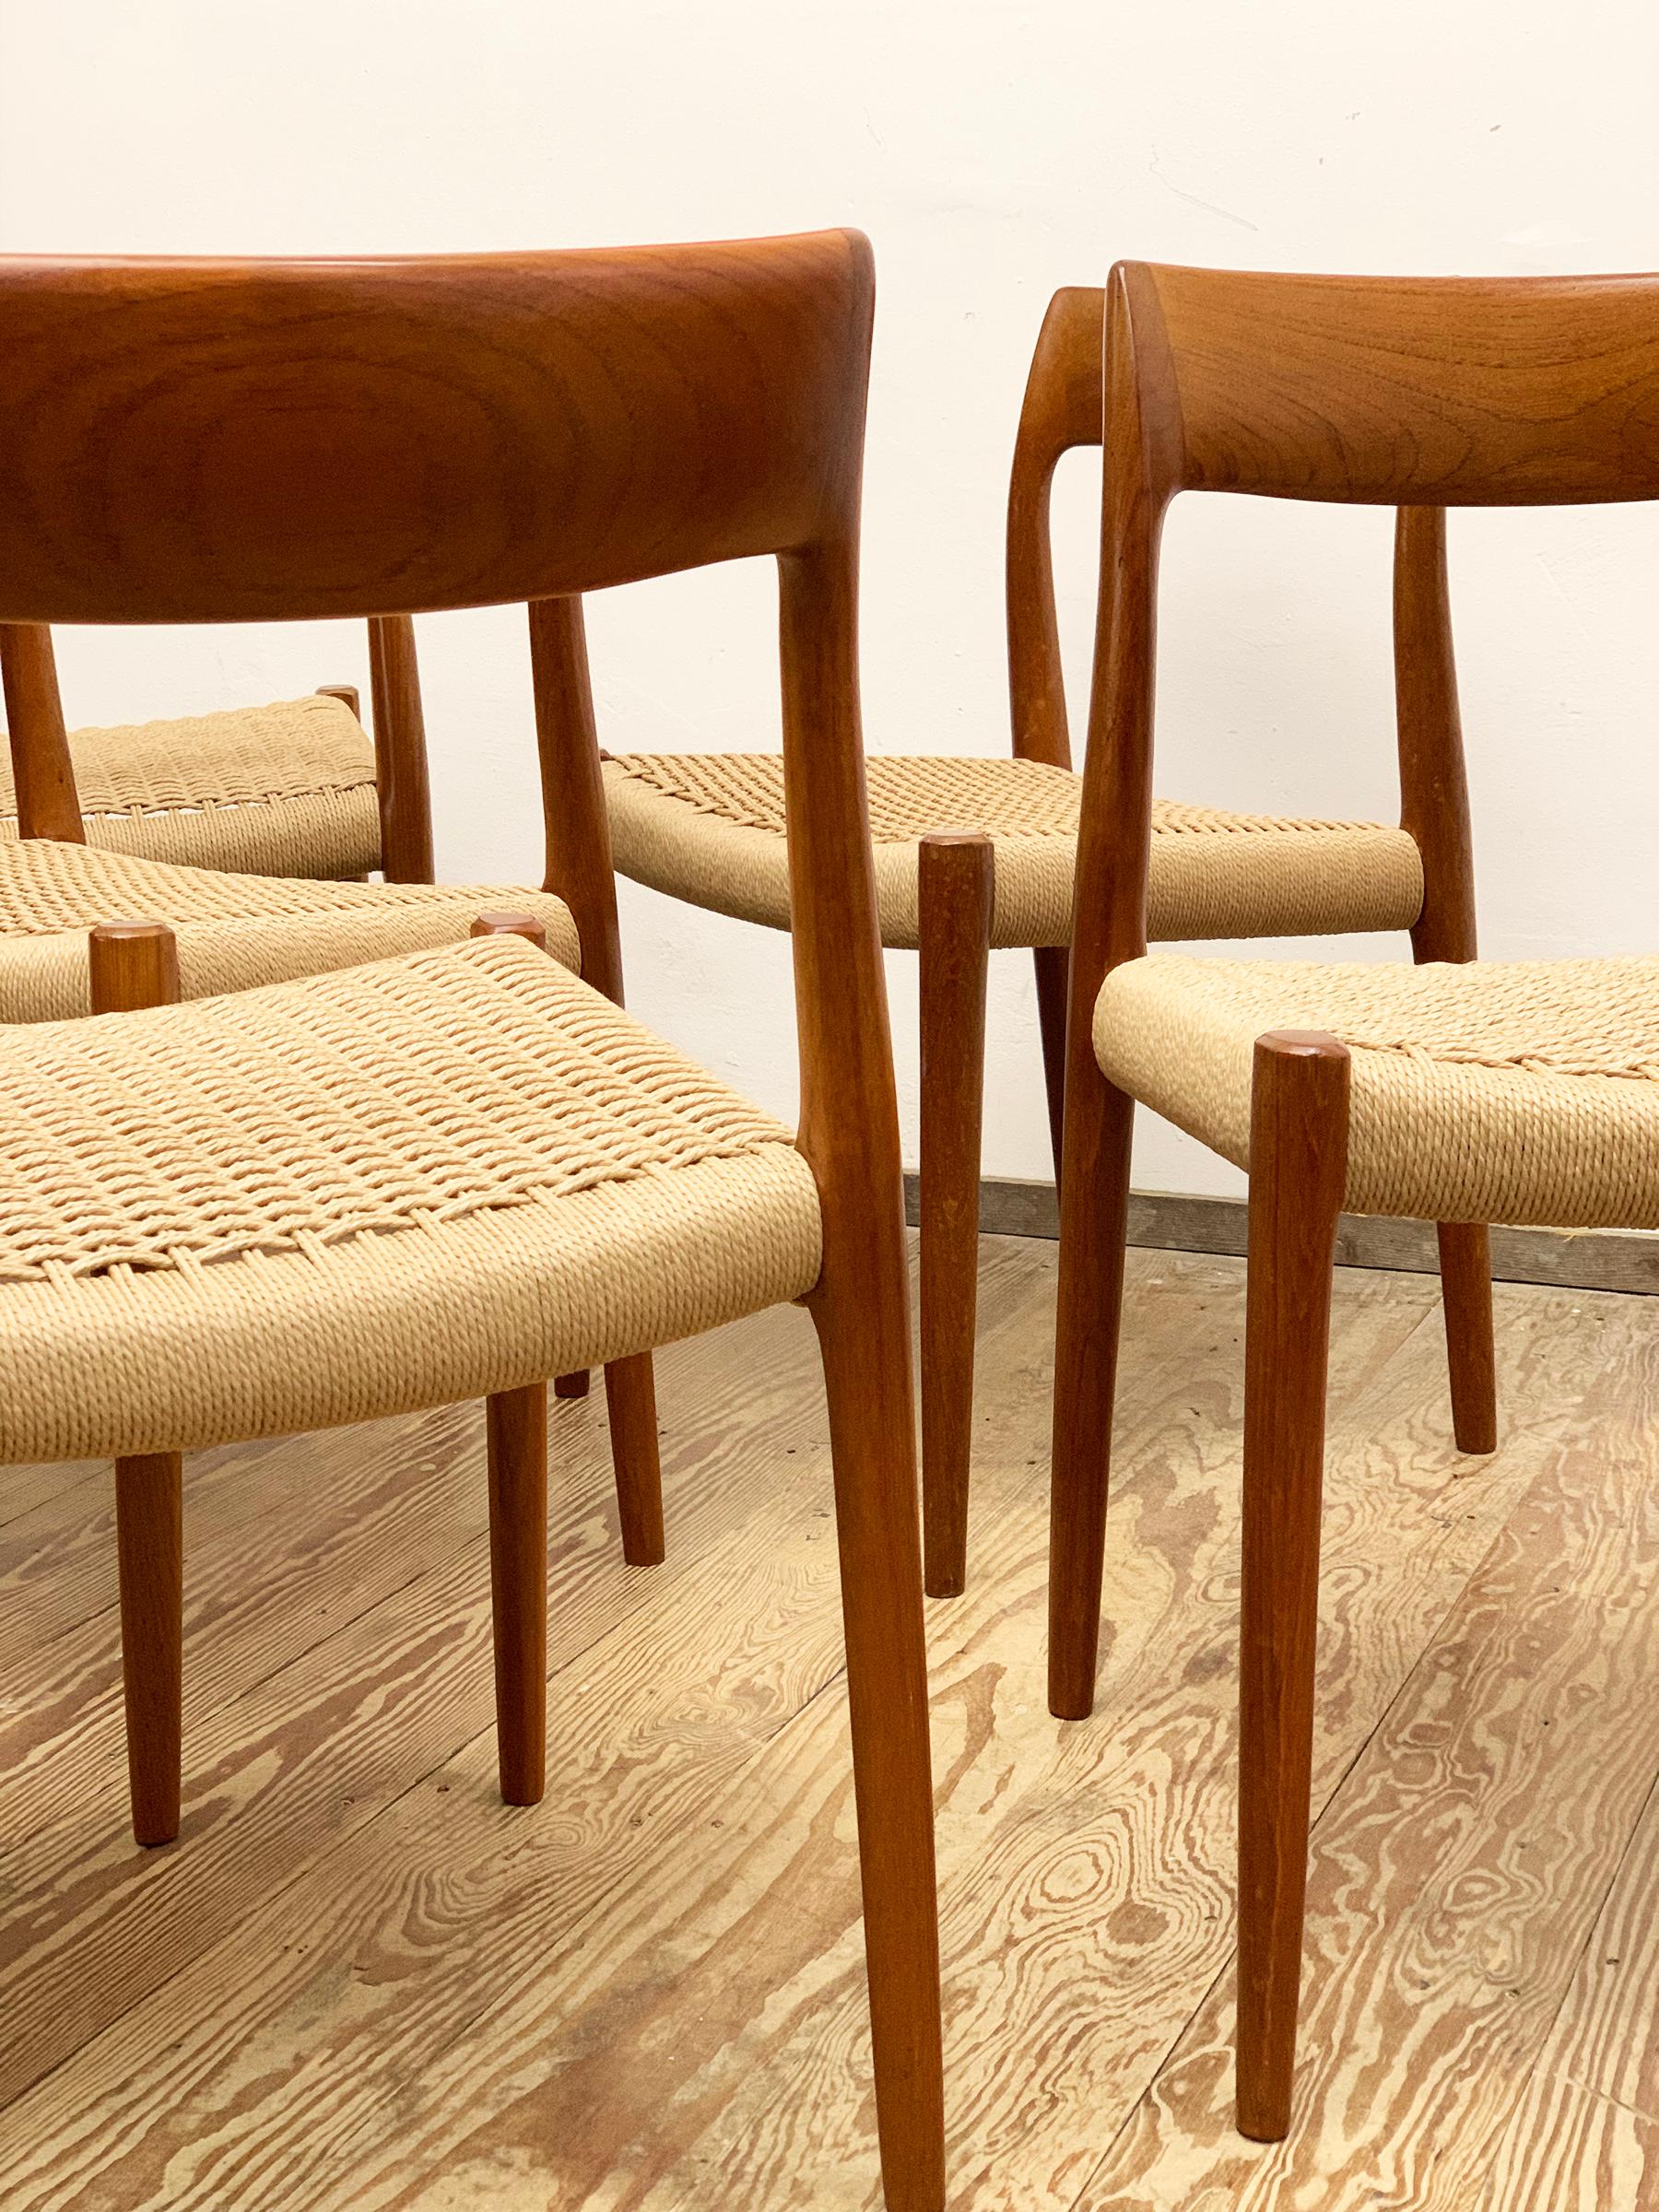 Mid-20th Century Mid-Century Teak Dining Chairs #77 by Niels O. Møller for J. L. Moller, Set of 6